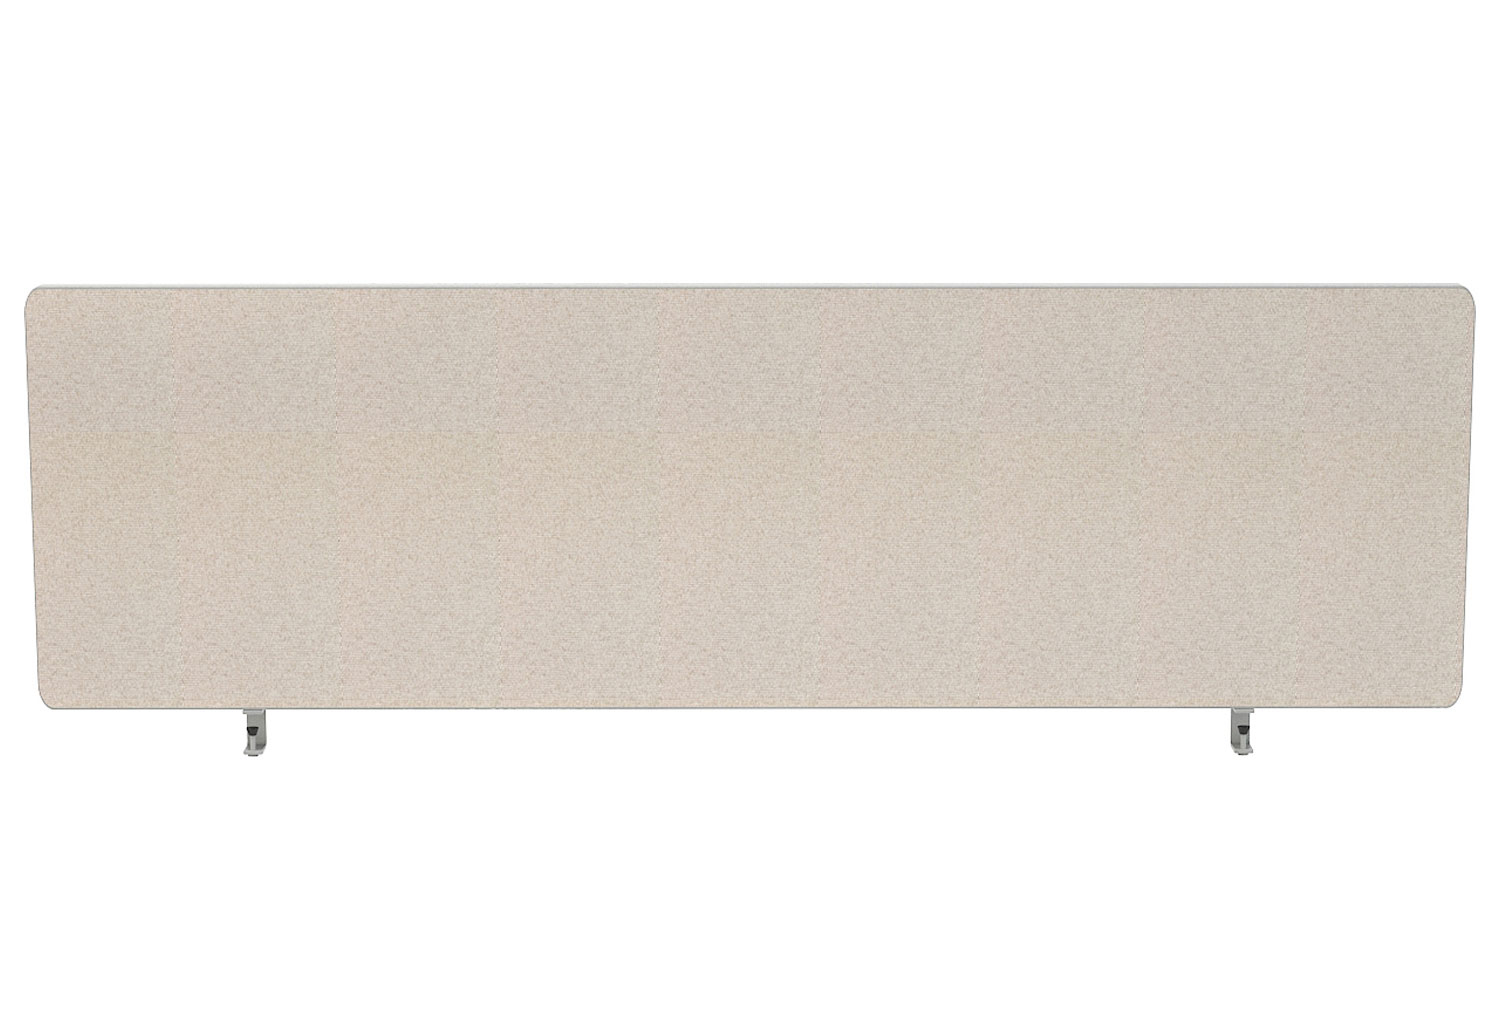 Griffin Rectangular Desktop Office Screens With Rounded Corners, 80wx2dx40h (cm), Light Grey